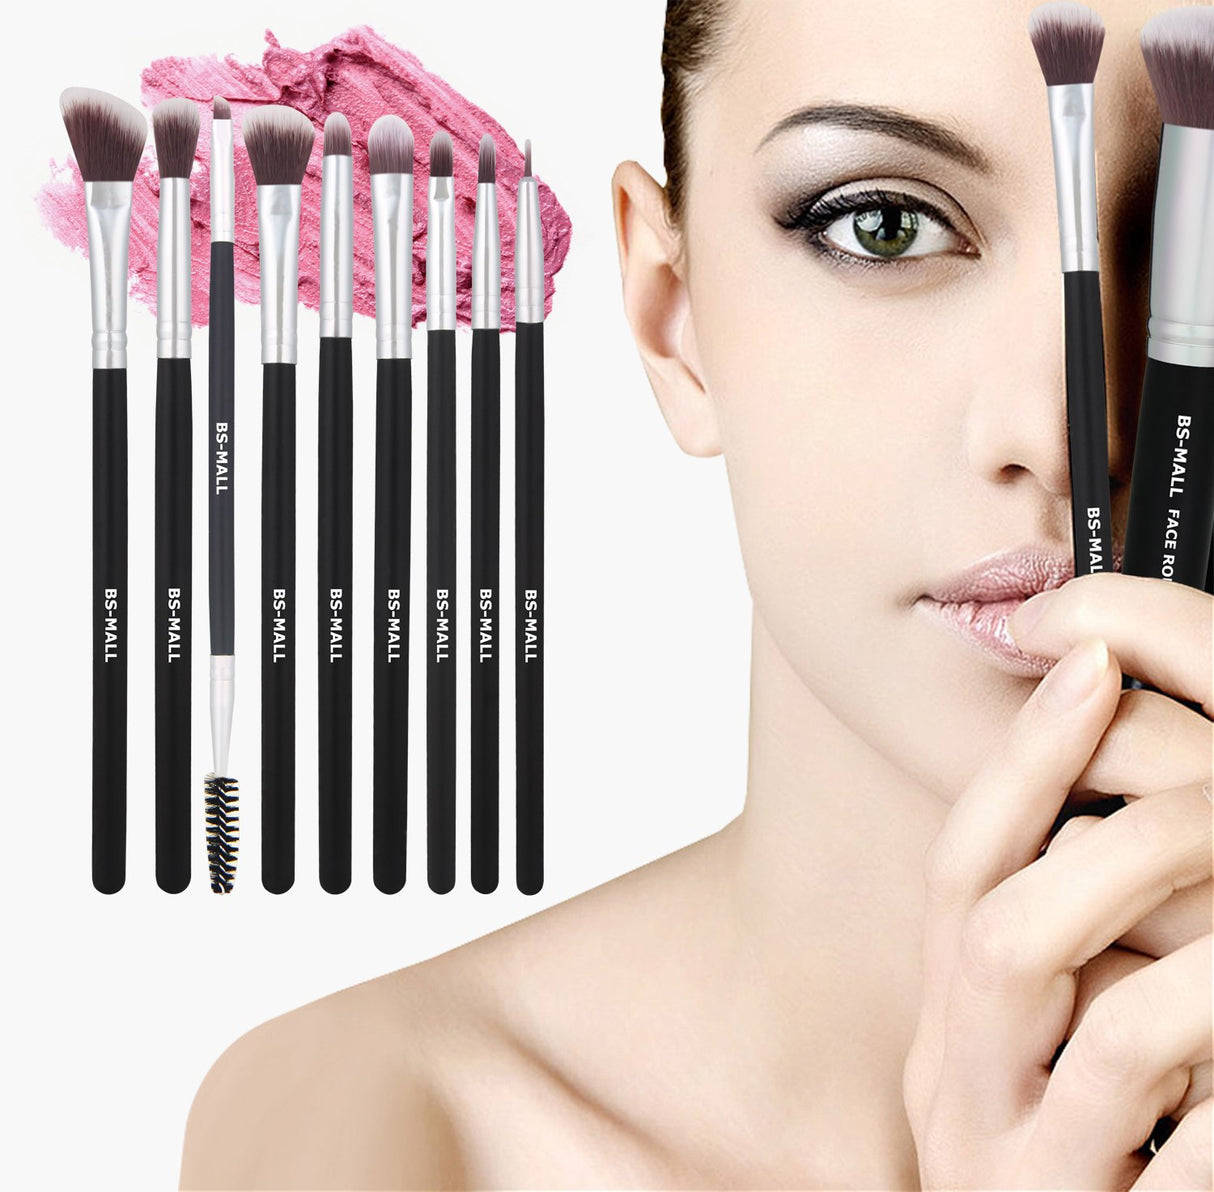 BS-MALL Makeup Brushes Premium 14 Pcs Synthetic Foundation Powder Concealers Eye Shadows Silver Black Makeup Brush Sets(Silver Black)